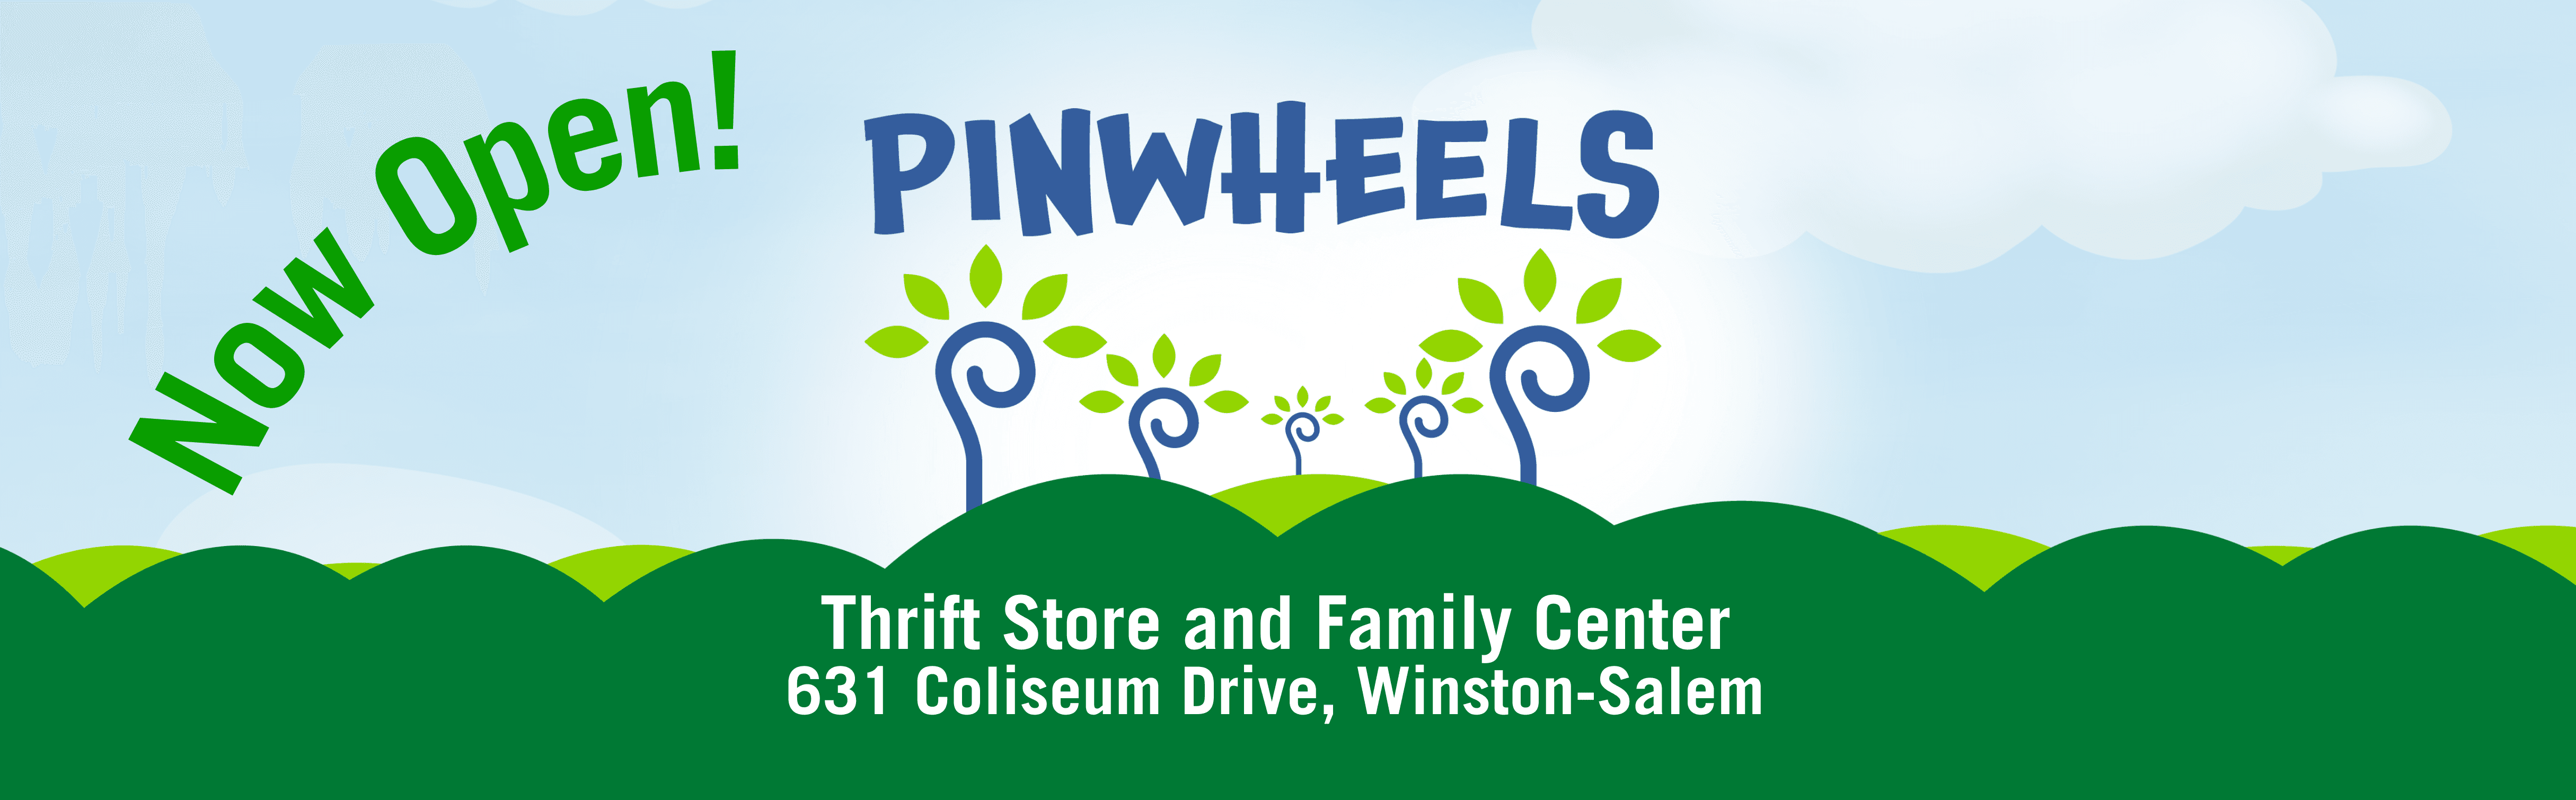 The Parenting PATH announces opening of Pinwheels Thrift Store and Family Center